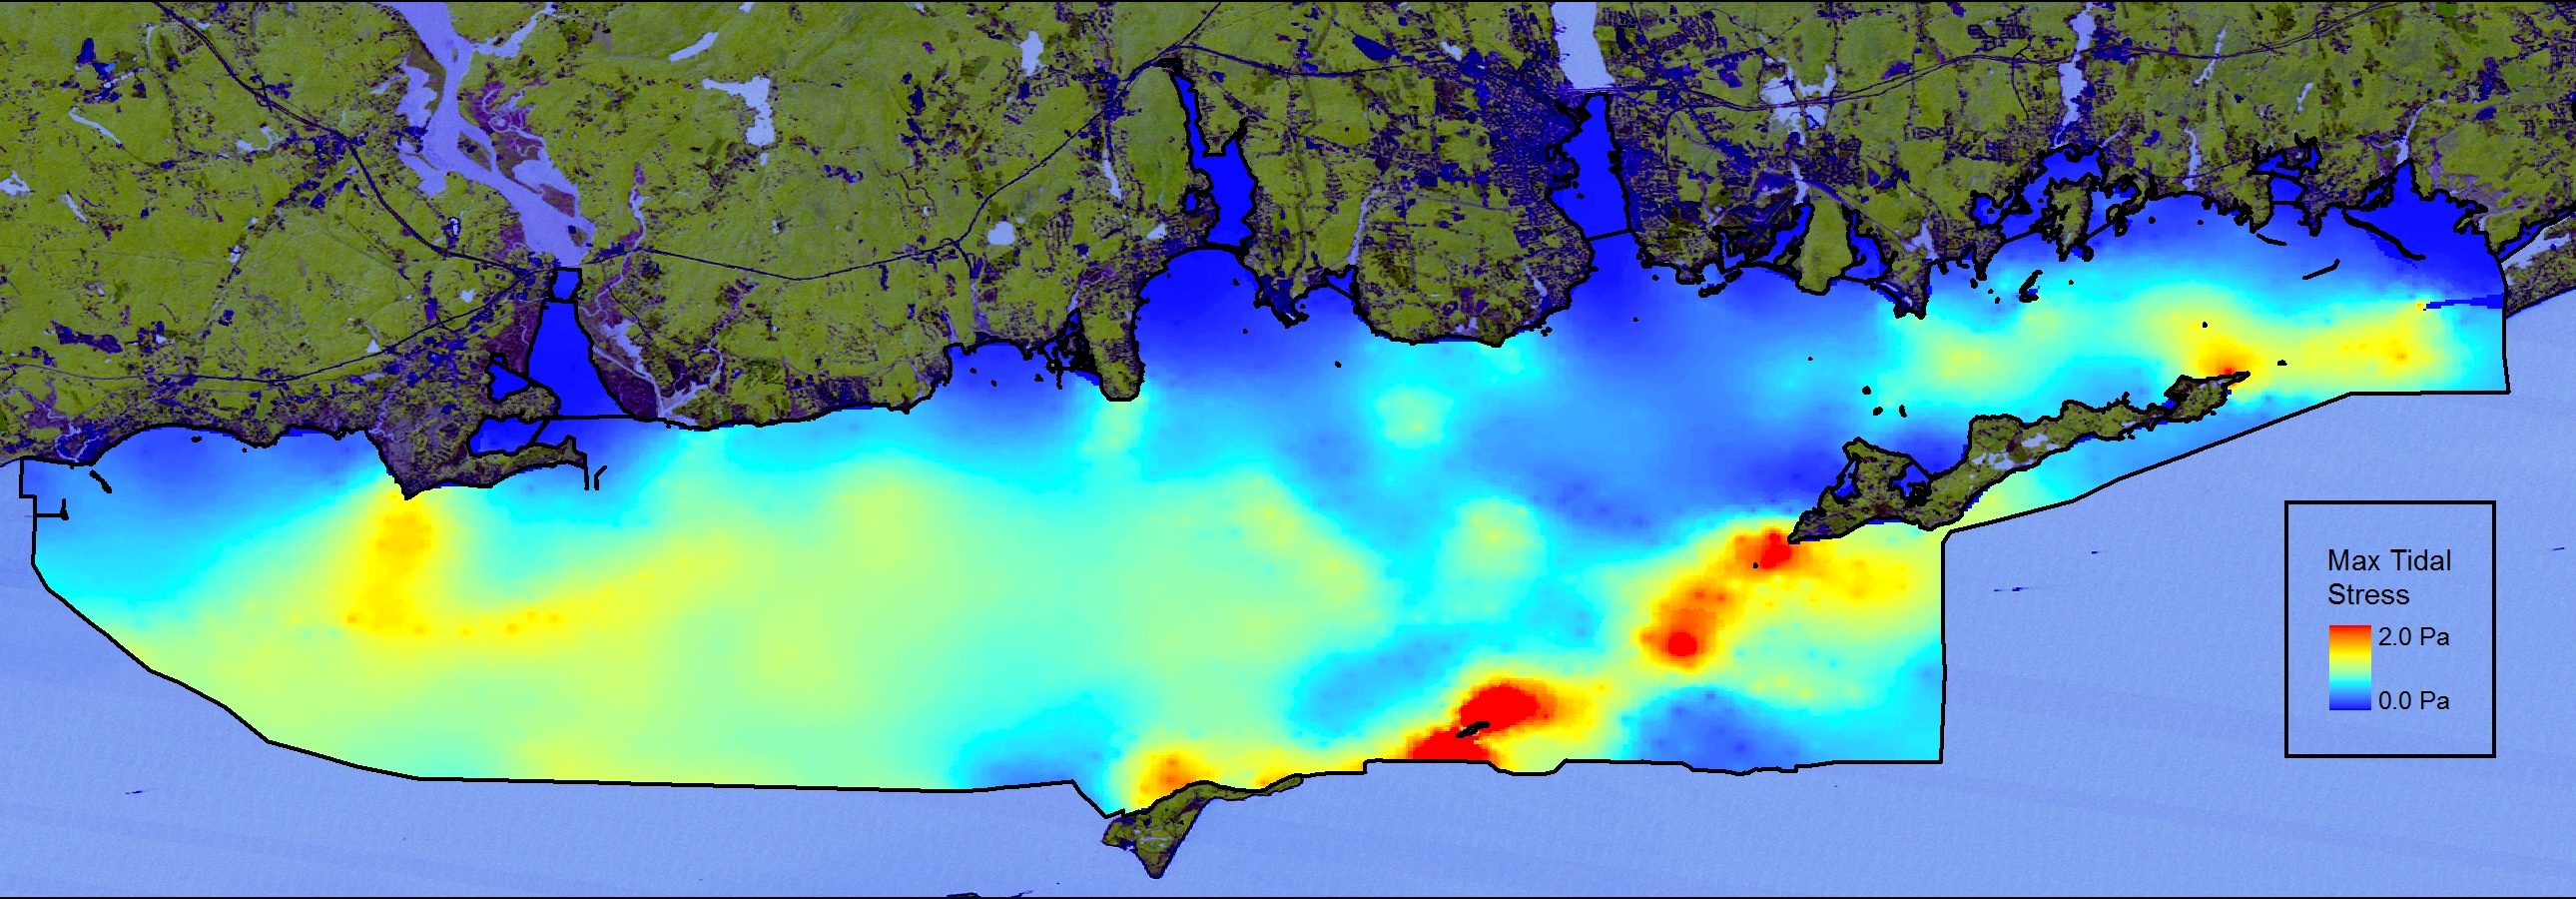 Map of predicted maximum tidal bottom stress in the Phase II area